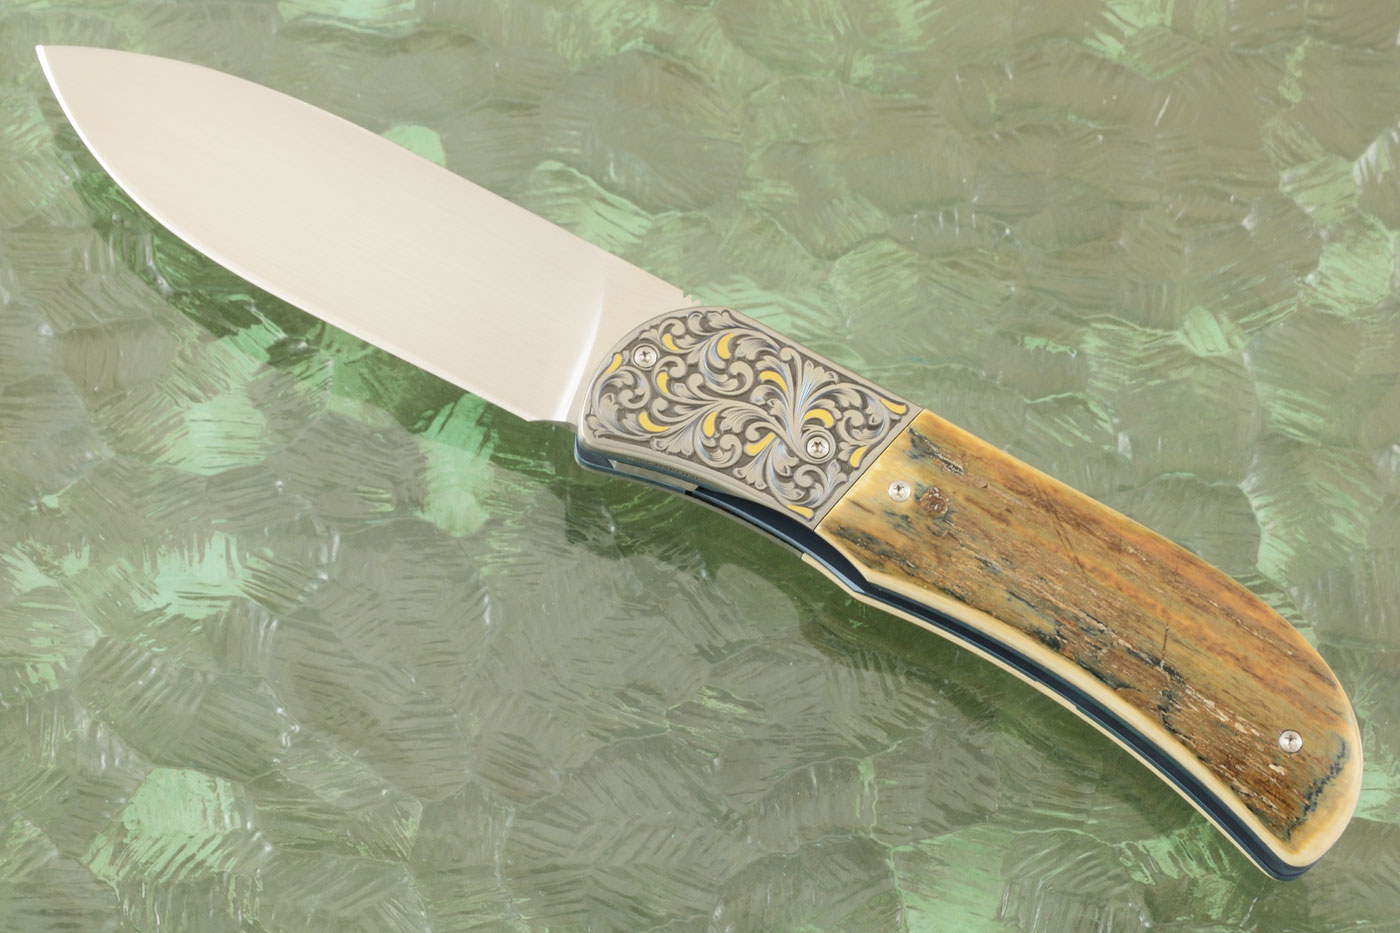 Sahara Signature with Mammoth Bark and Engraved Zirconium with Gold Inlay